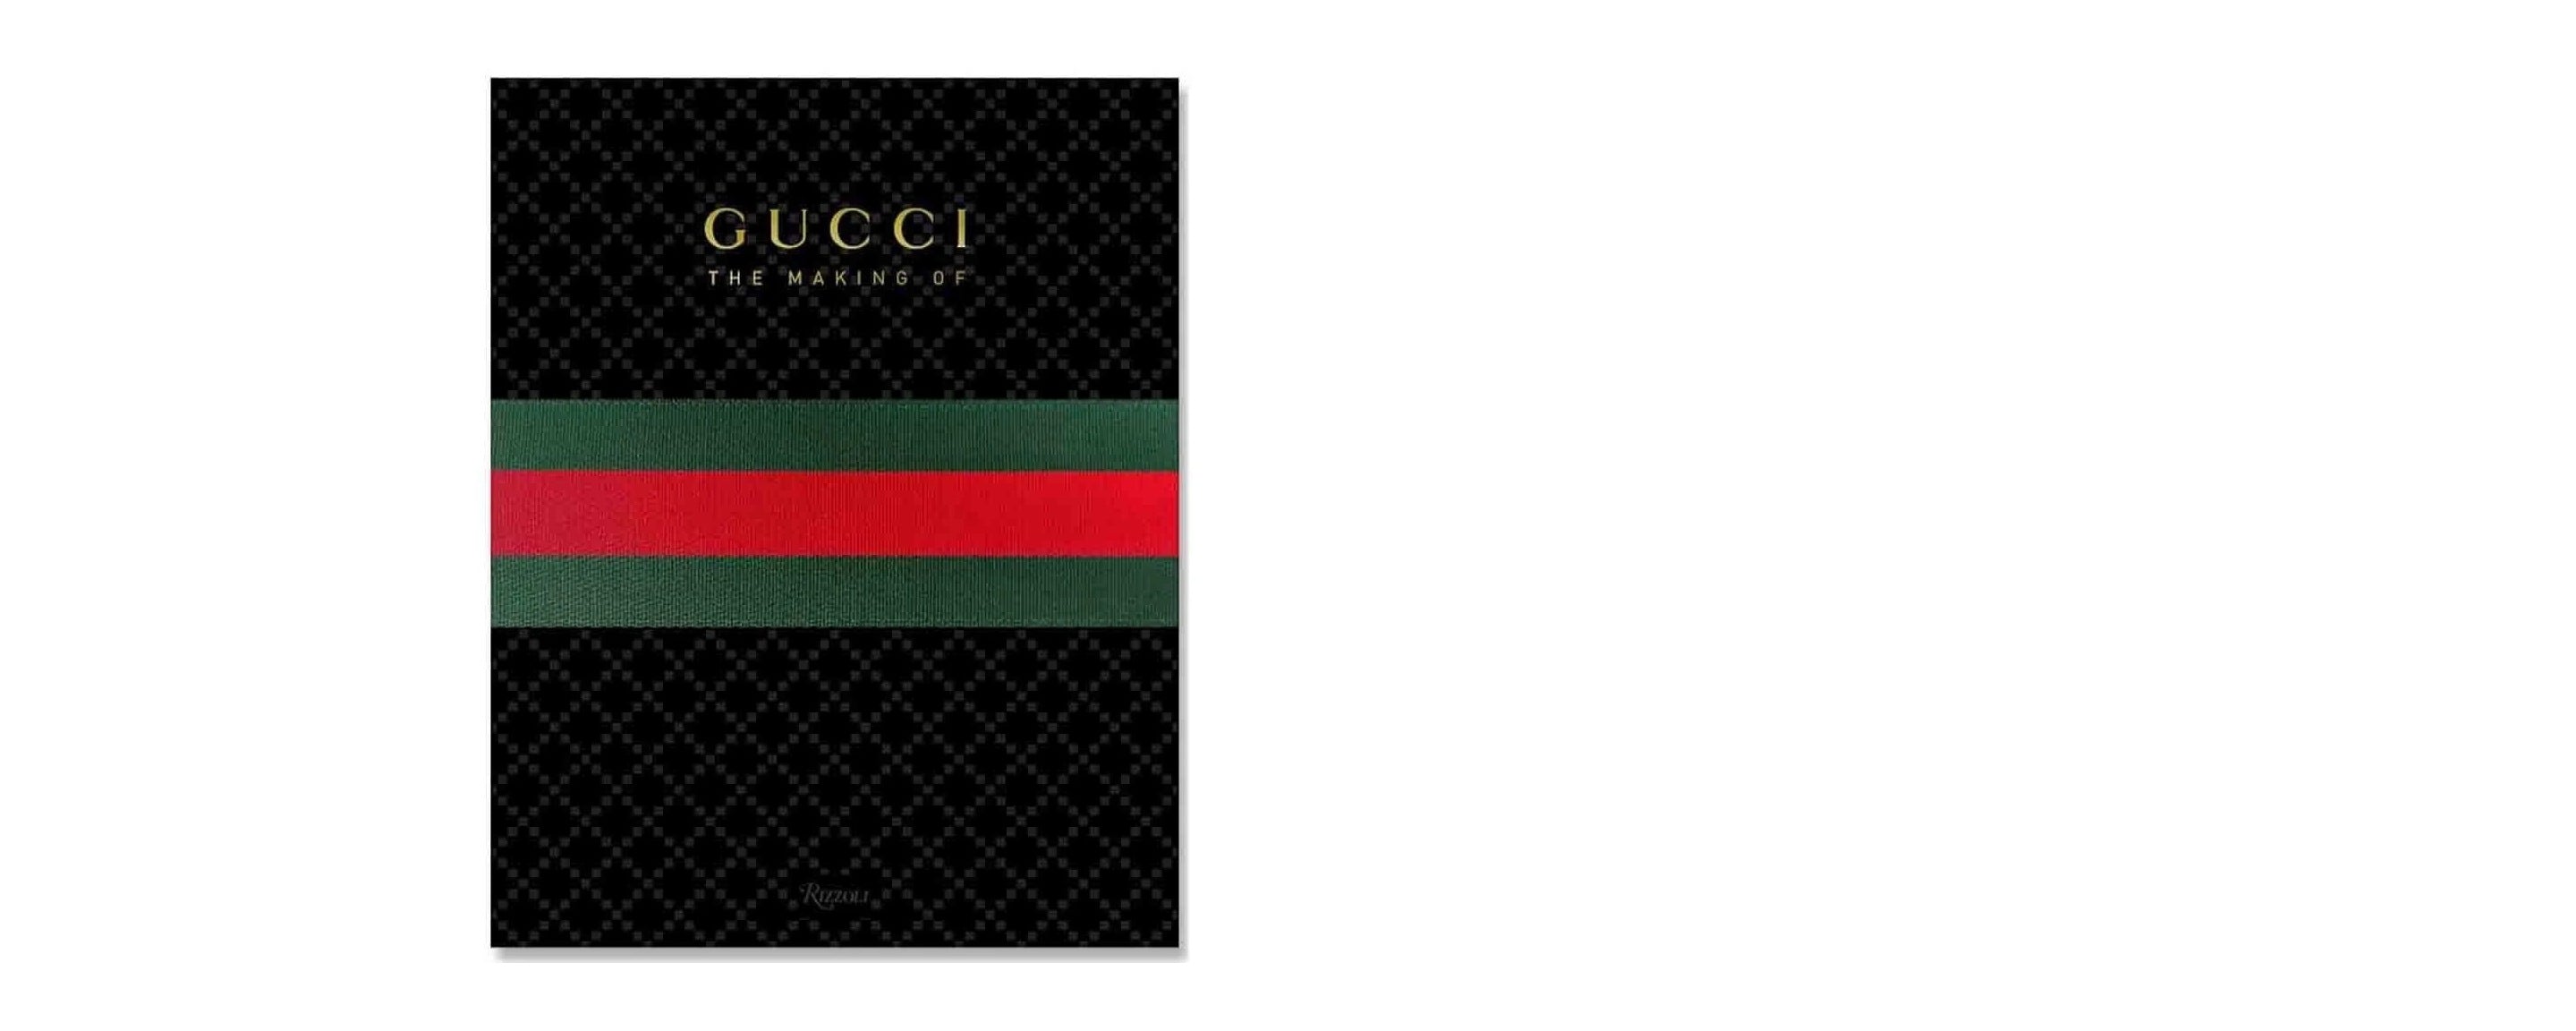 GUCCI THE MAKING OF グッチ 写真集 洋書（英語） - 洋書